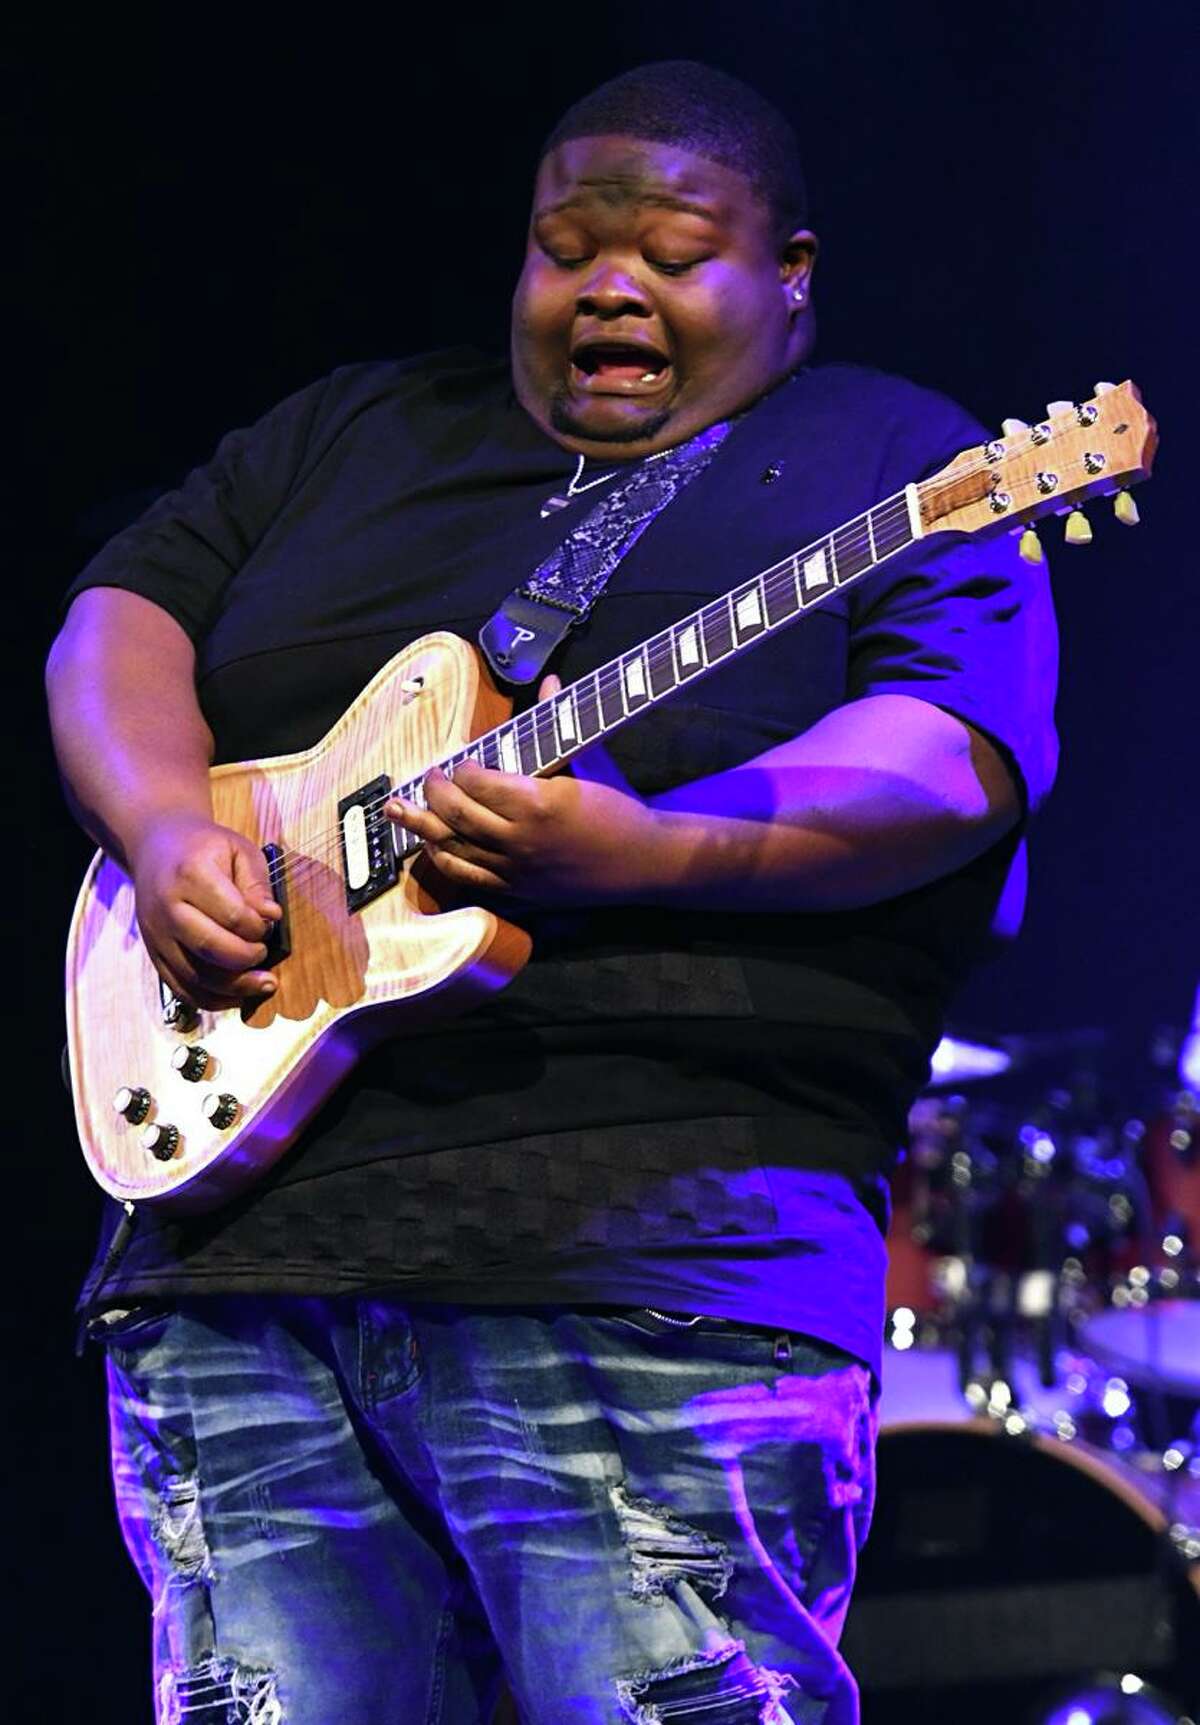 Blues guitarist, singer and songwriter Christone “Kingfish” Ingram is shown performing on stage during his live show  Feb. 11 at Infinity Hall in Hartford. His debut album, Kingfish, was released in May 2019. In addition to his own album, musicians he has recorded with include Buddy Guy, Eric Gales and Keb Mo. He has shared the stage with well known blues artists and younger blues musicians such as the Tedeschi Trucks band, Samantha Fish, Bob Margolin and Rick Derringer. To learn more about Kingfish, go to  www.christonekingfishingram.com